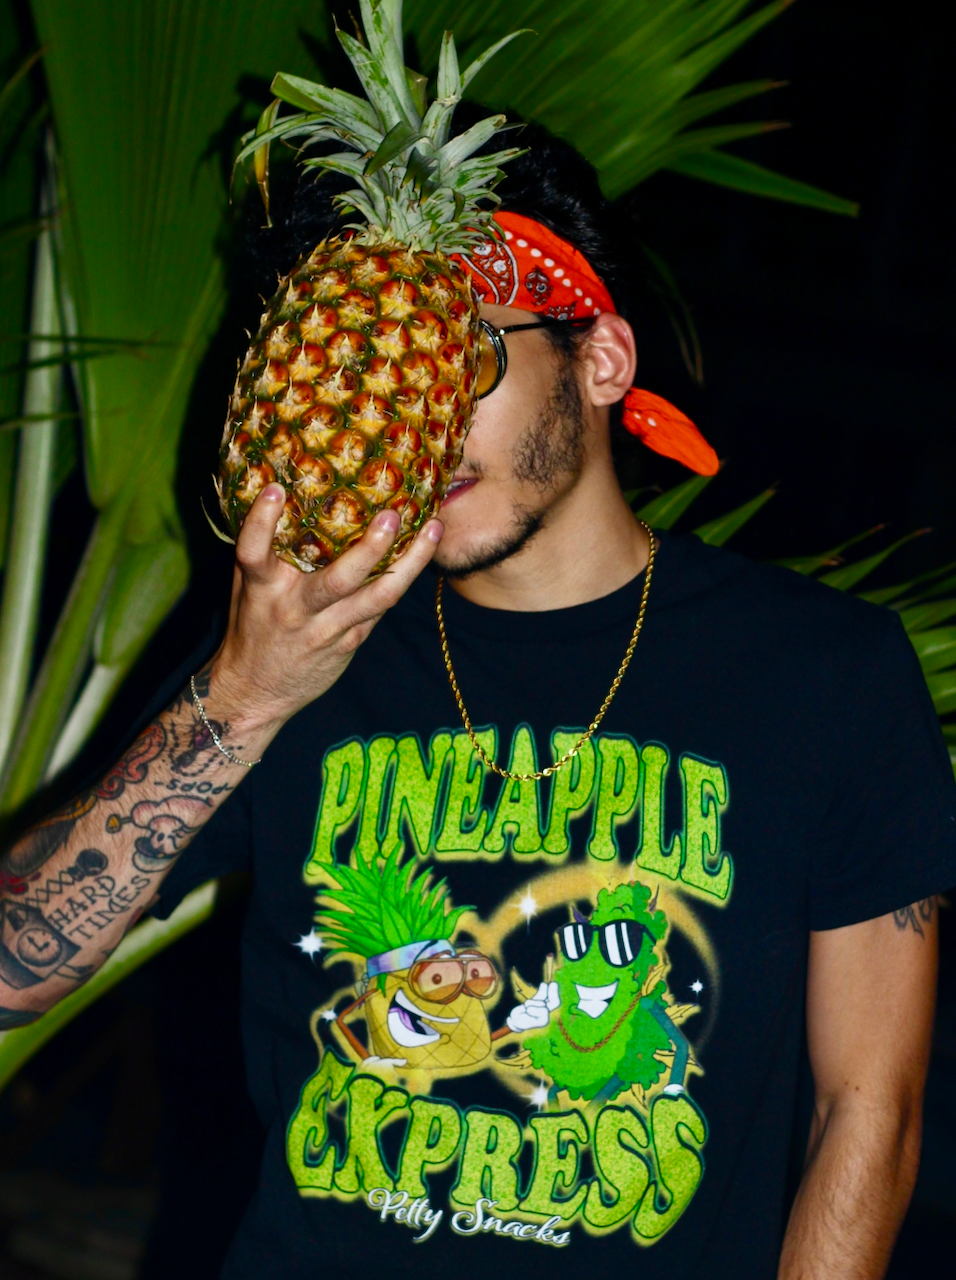 Model pictured wearing Pineapple Express t-shirt. Model is wearing orange bandana and pineapple express t-shirt, while holding a pineapple fruit in front of their face.